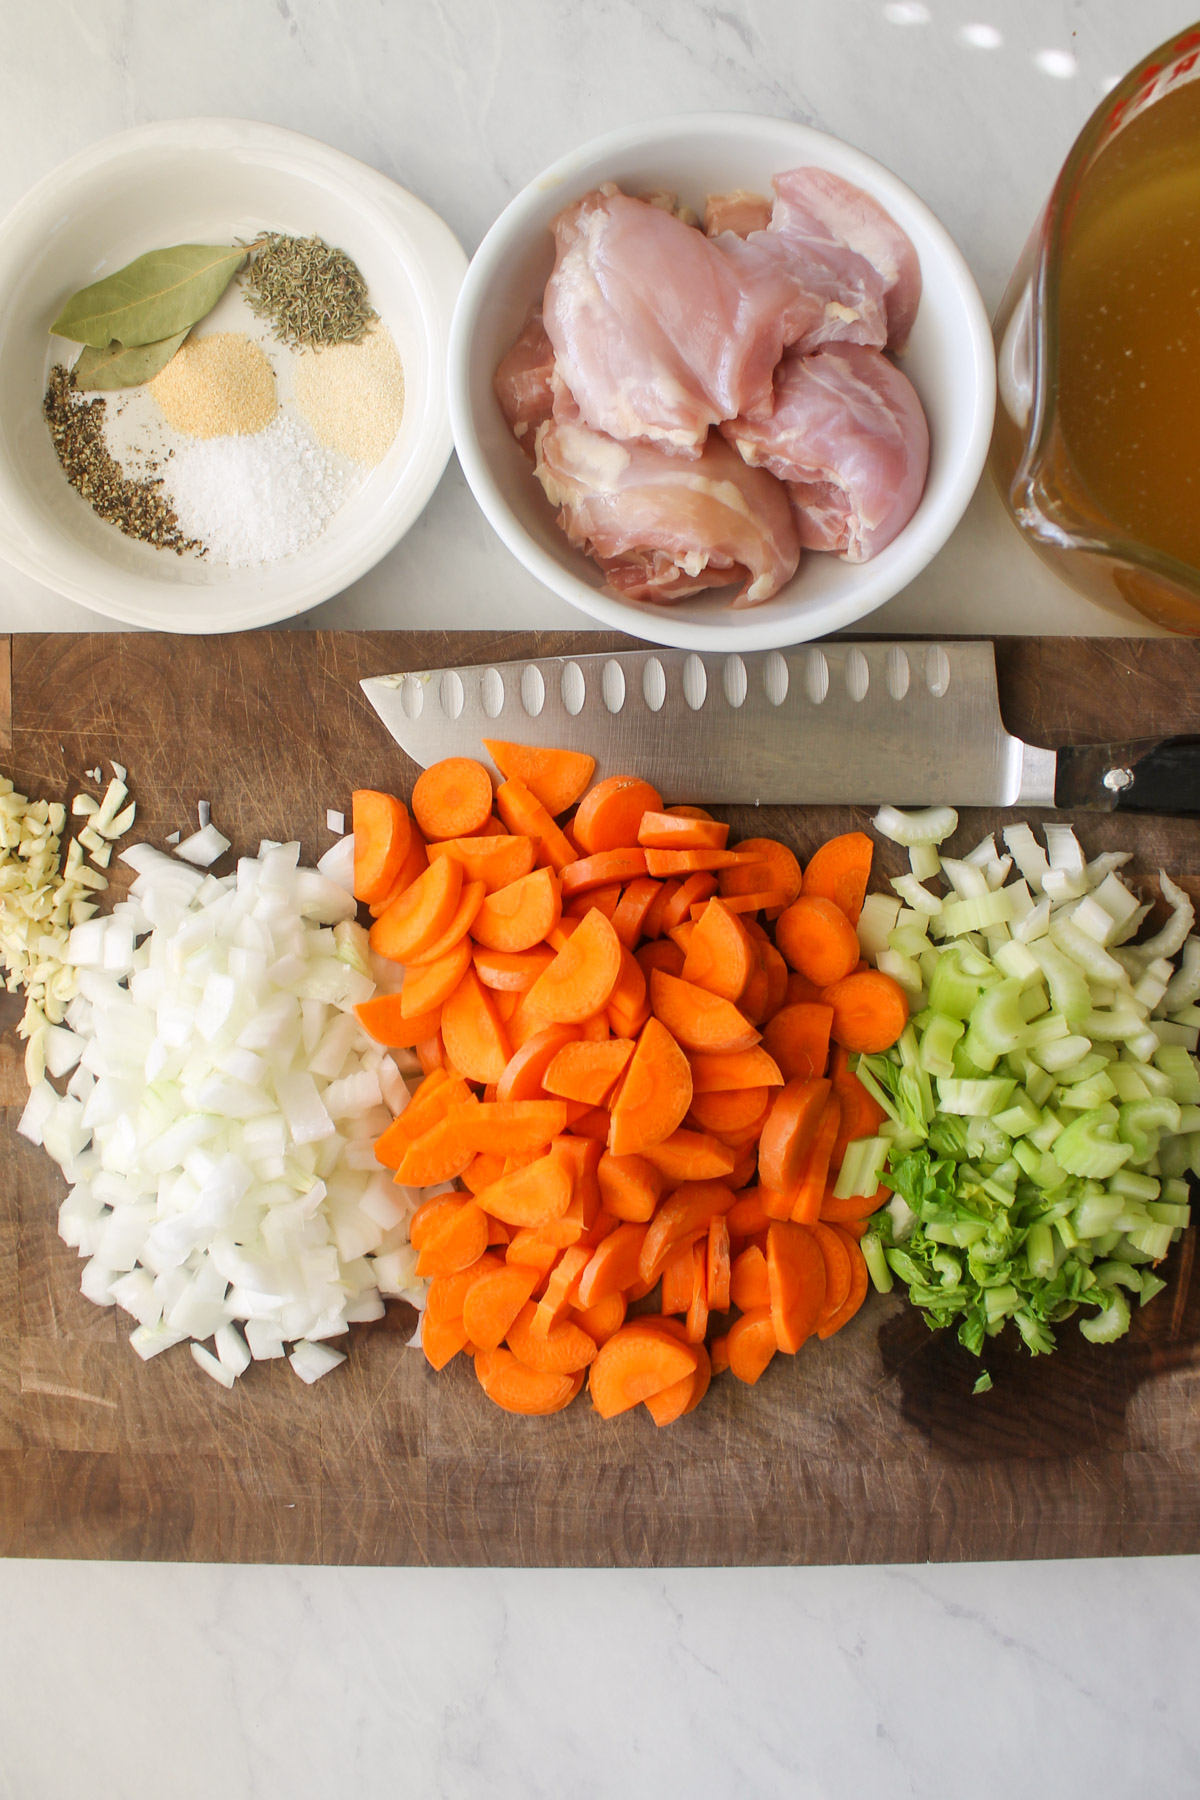 Chopped onion, carrots, celery and garlic on a cutting board with a bowl of raw chicken and seasonings.